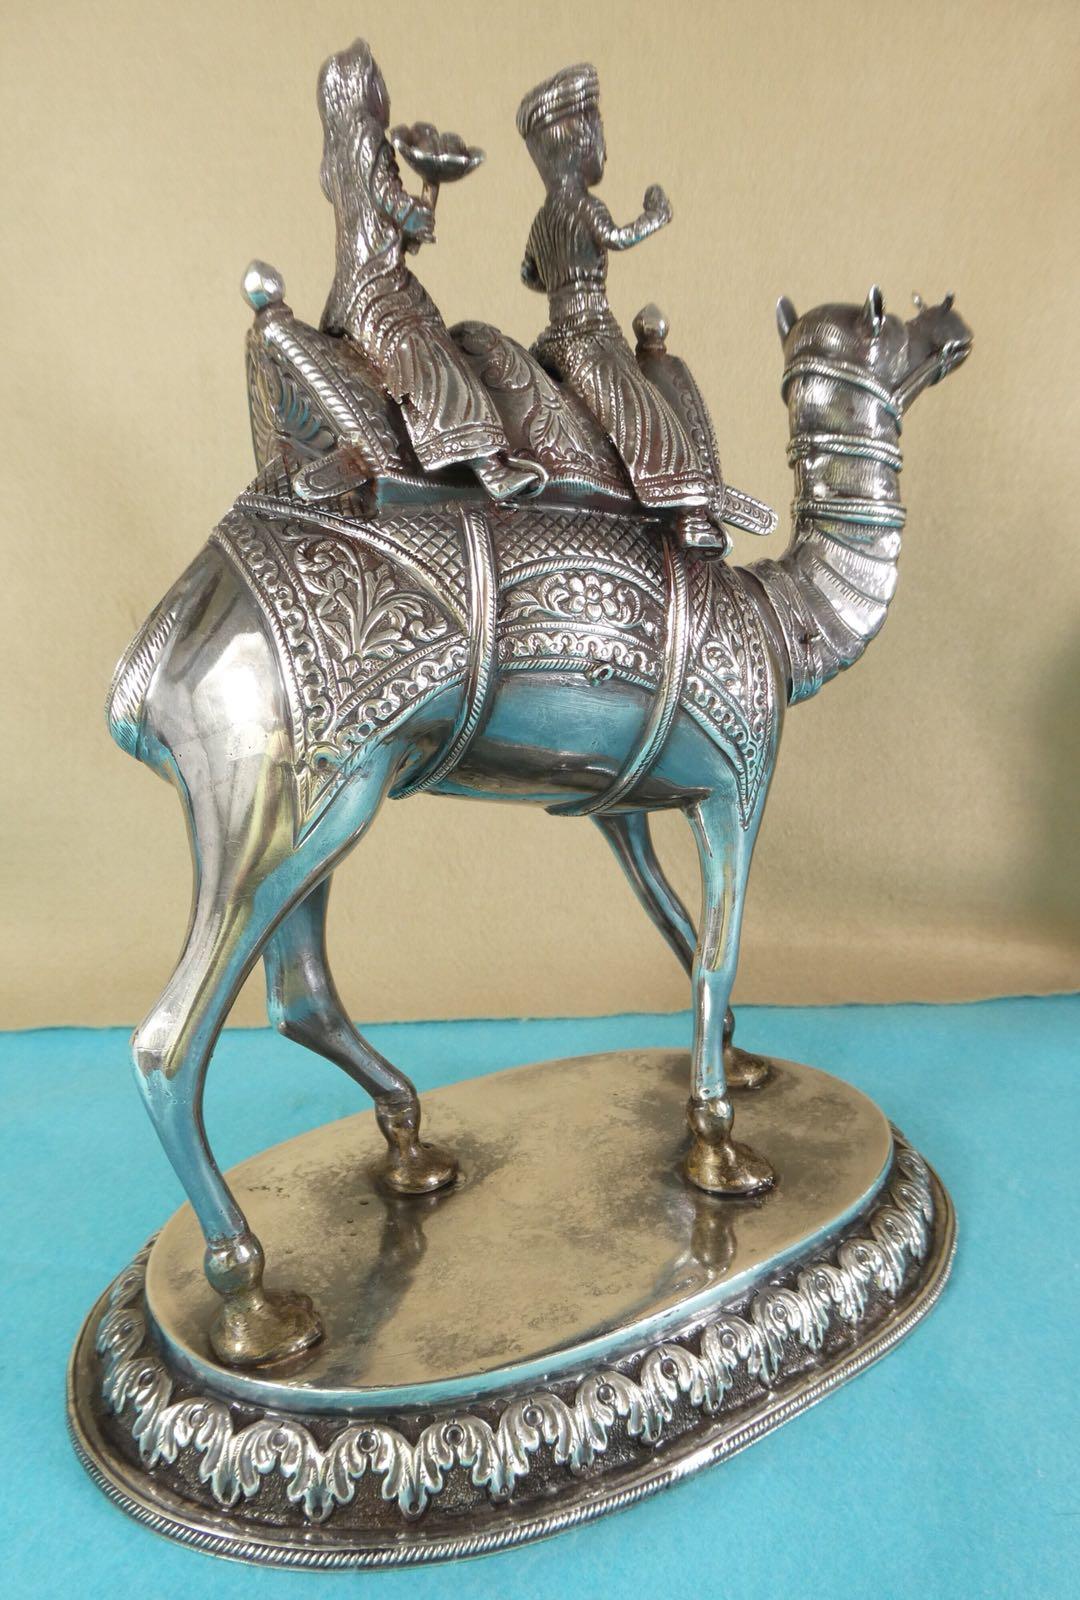 19th Century Magnificent Antique Colonial Indian Silver Camel with Riders, circa 1880